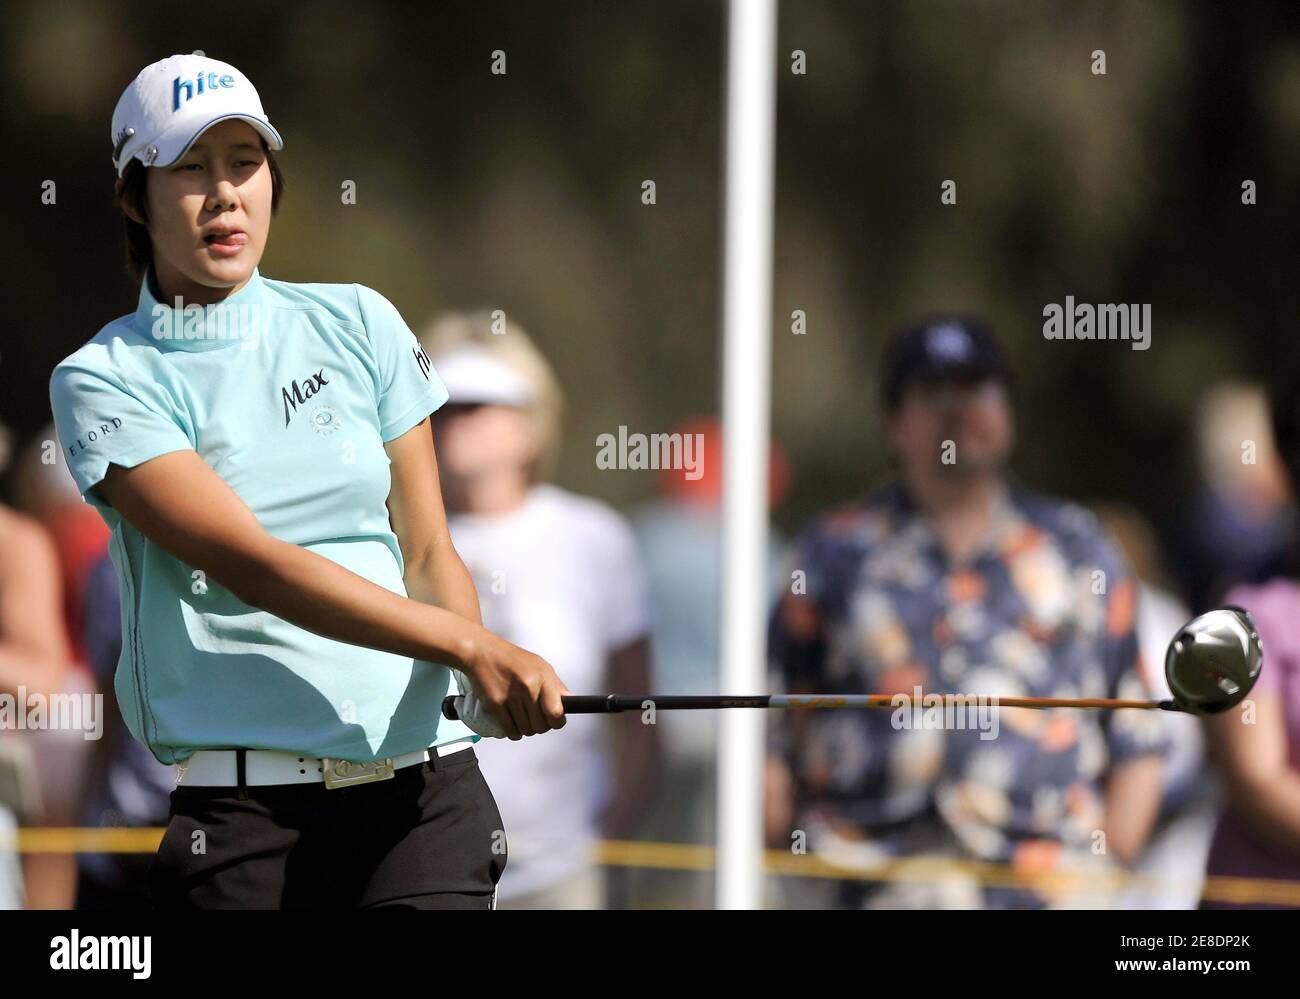 Kim Song-Hee of South Korea watches her drive on the second hole during final round play of the LPGA's Kraft Nabisco Championship golf tournament in Rancho Mirage, California, April 4, 2010.  REUTERS/Gus Ruelas (UNITED STATES - Tags: SPORT GOLF) Stock Photo